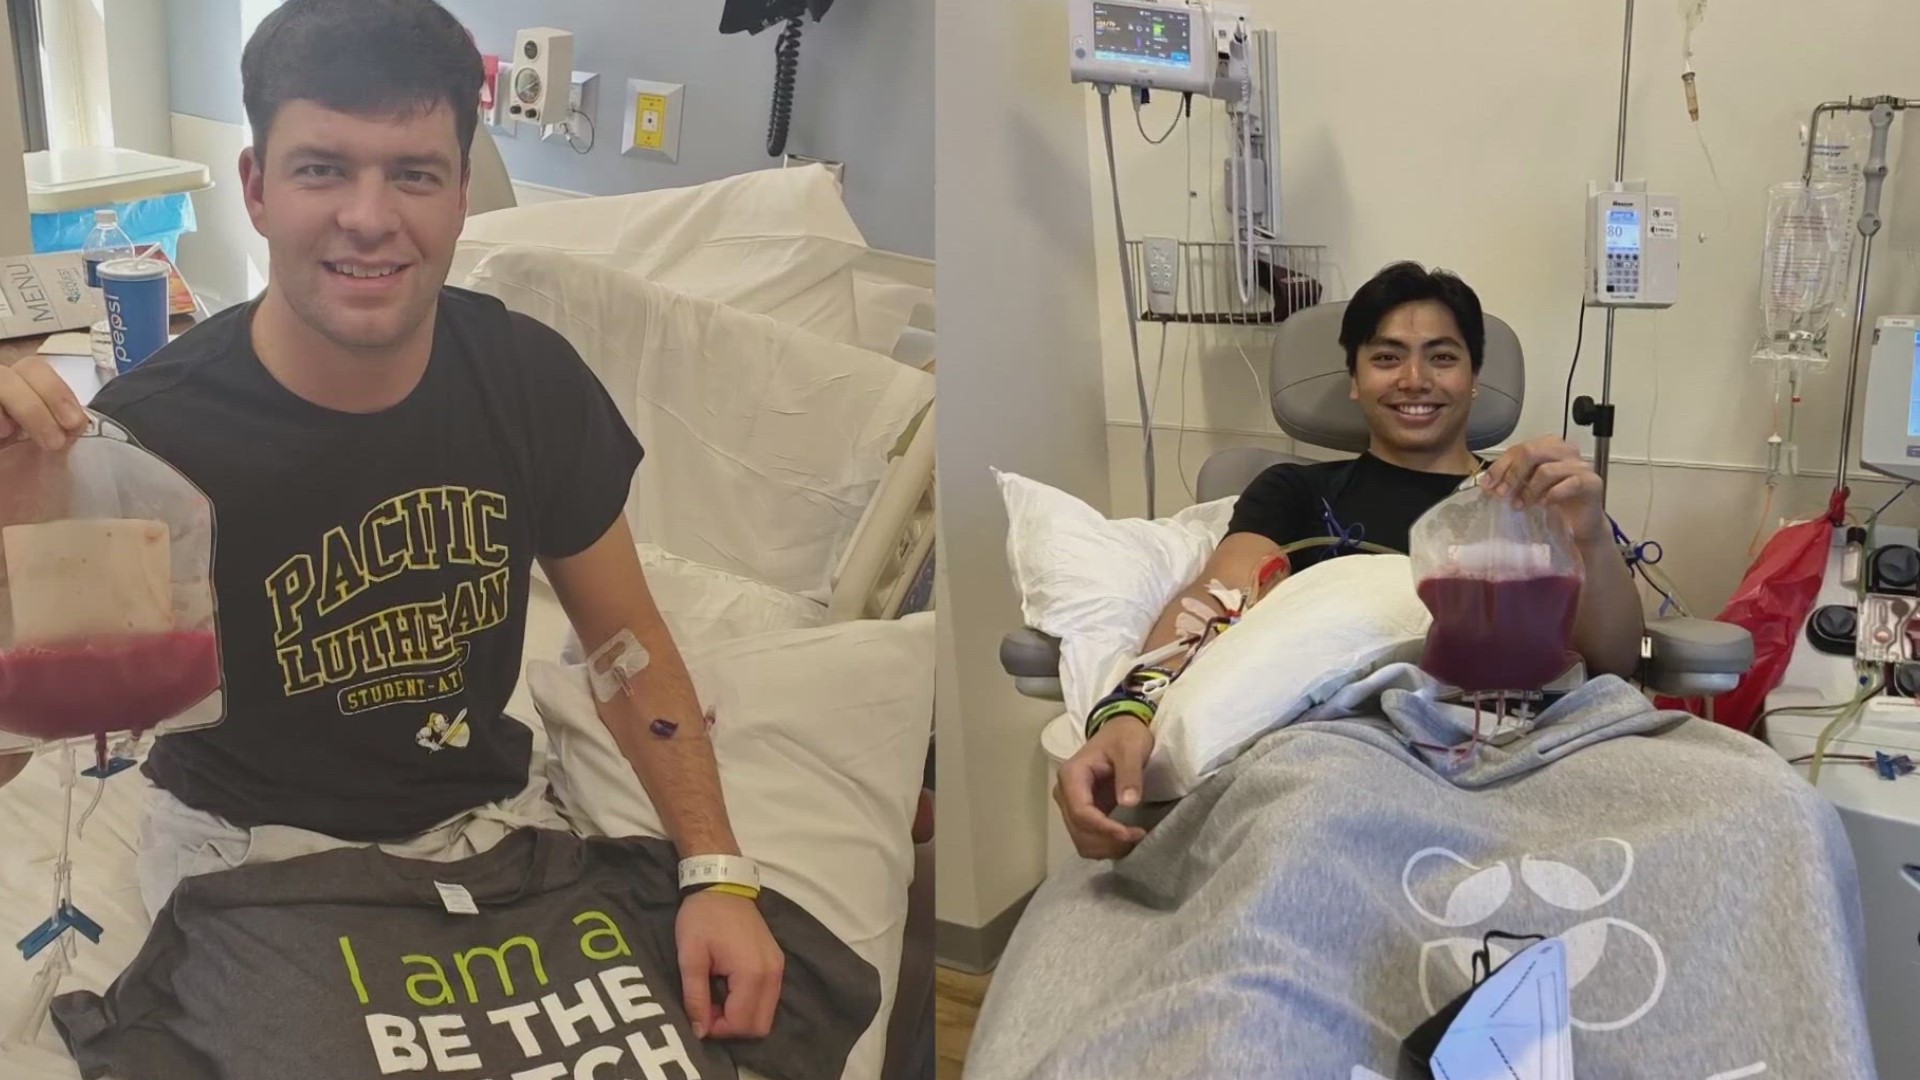 Erik Bainter and Jai Alapai both matched with other people who are in need of bone marrow transplants.